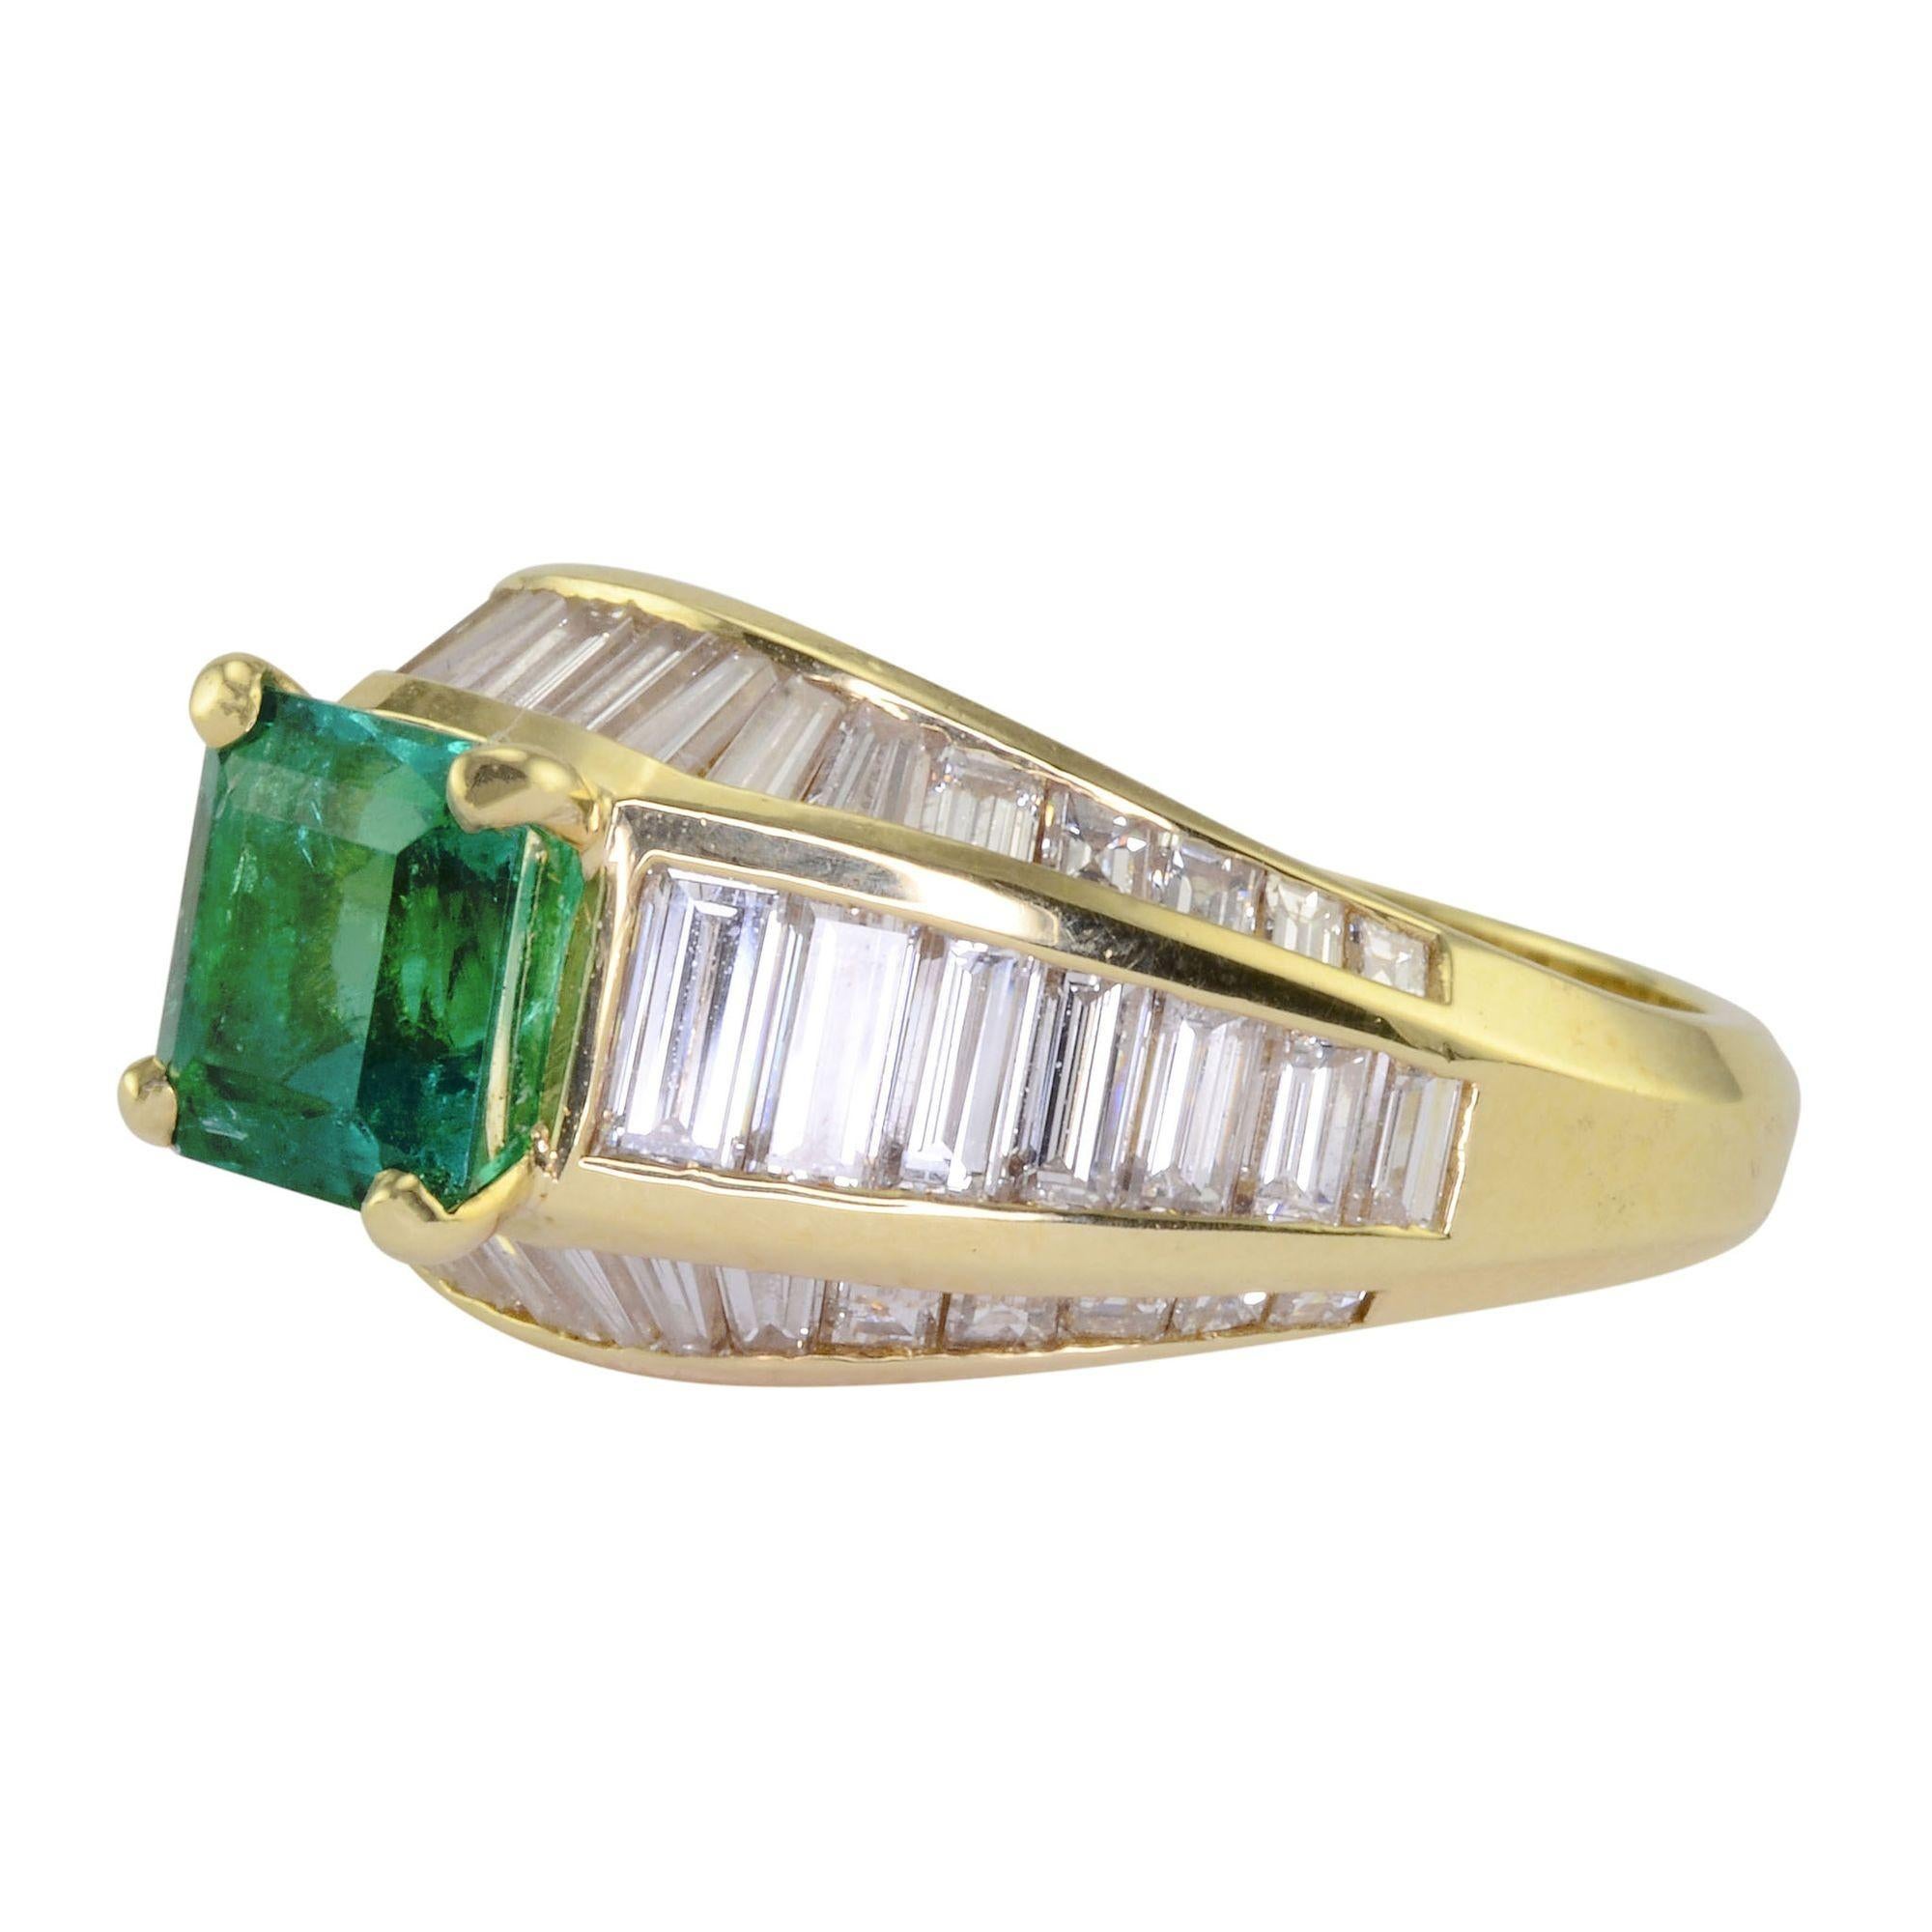 Estate 1.80 carat emerald and diamond ring. This 18 karat yellow gold ring has one square cut emerald at 1.80 carats and 50 baguette diamonds at 2.50 carat total weight VS1-2 clarity F-G color. The emerald ring is a size 6.5. This emerald diamond